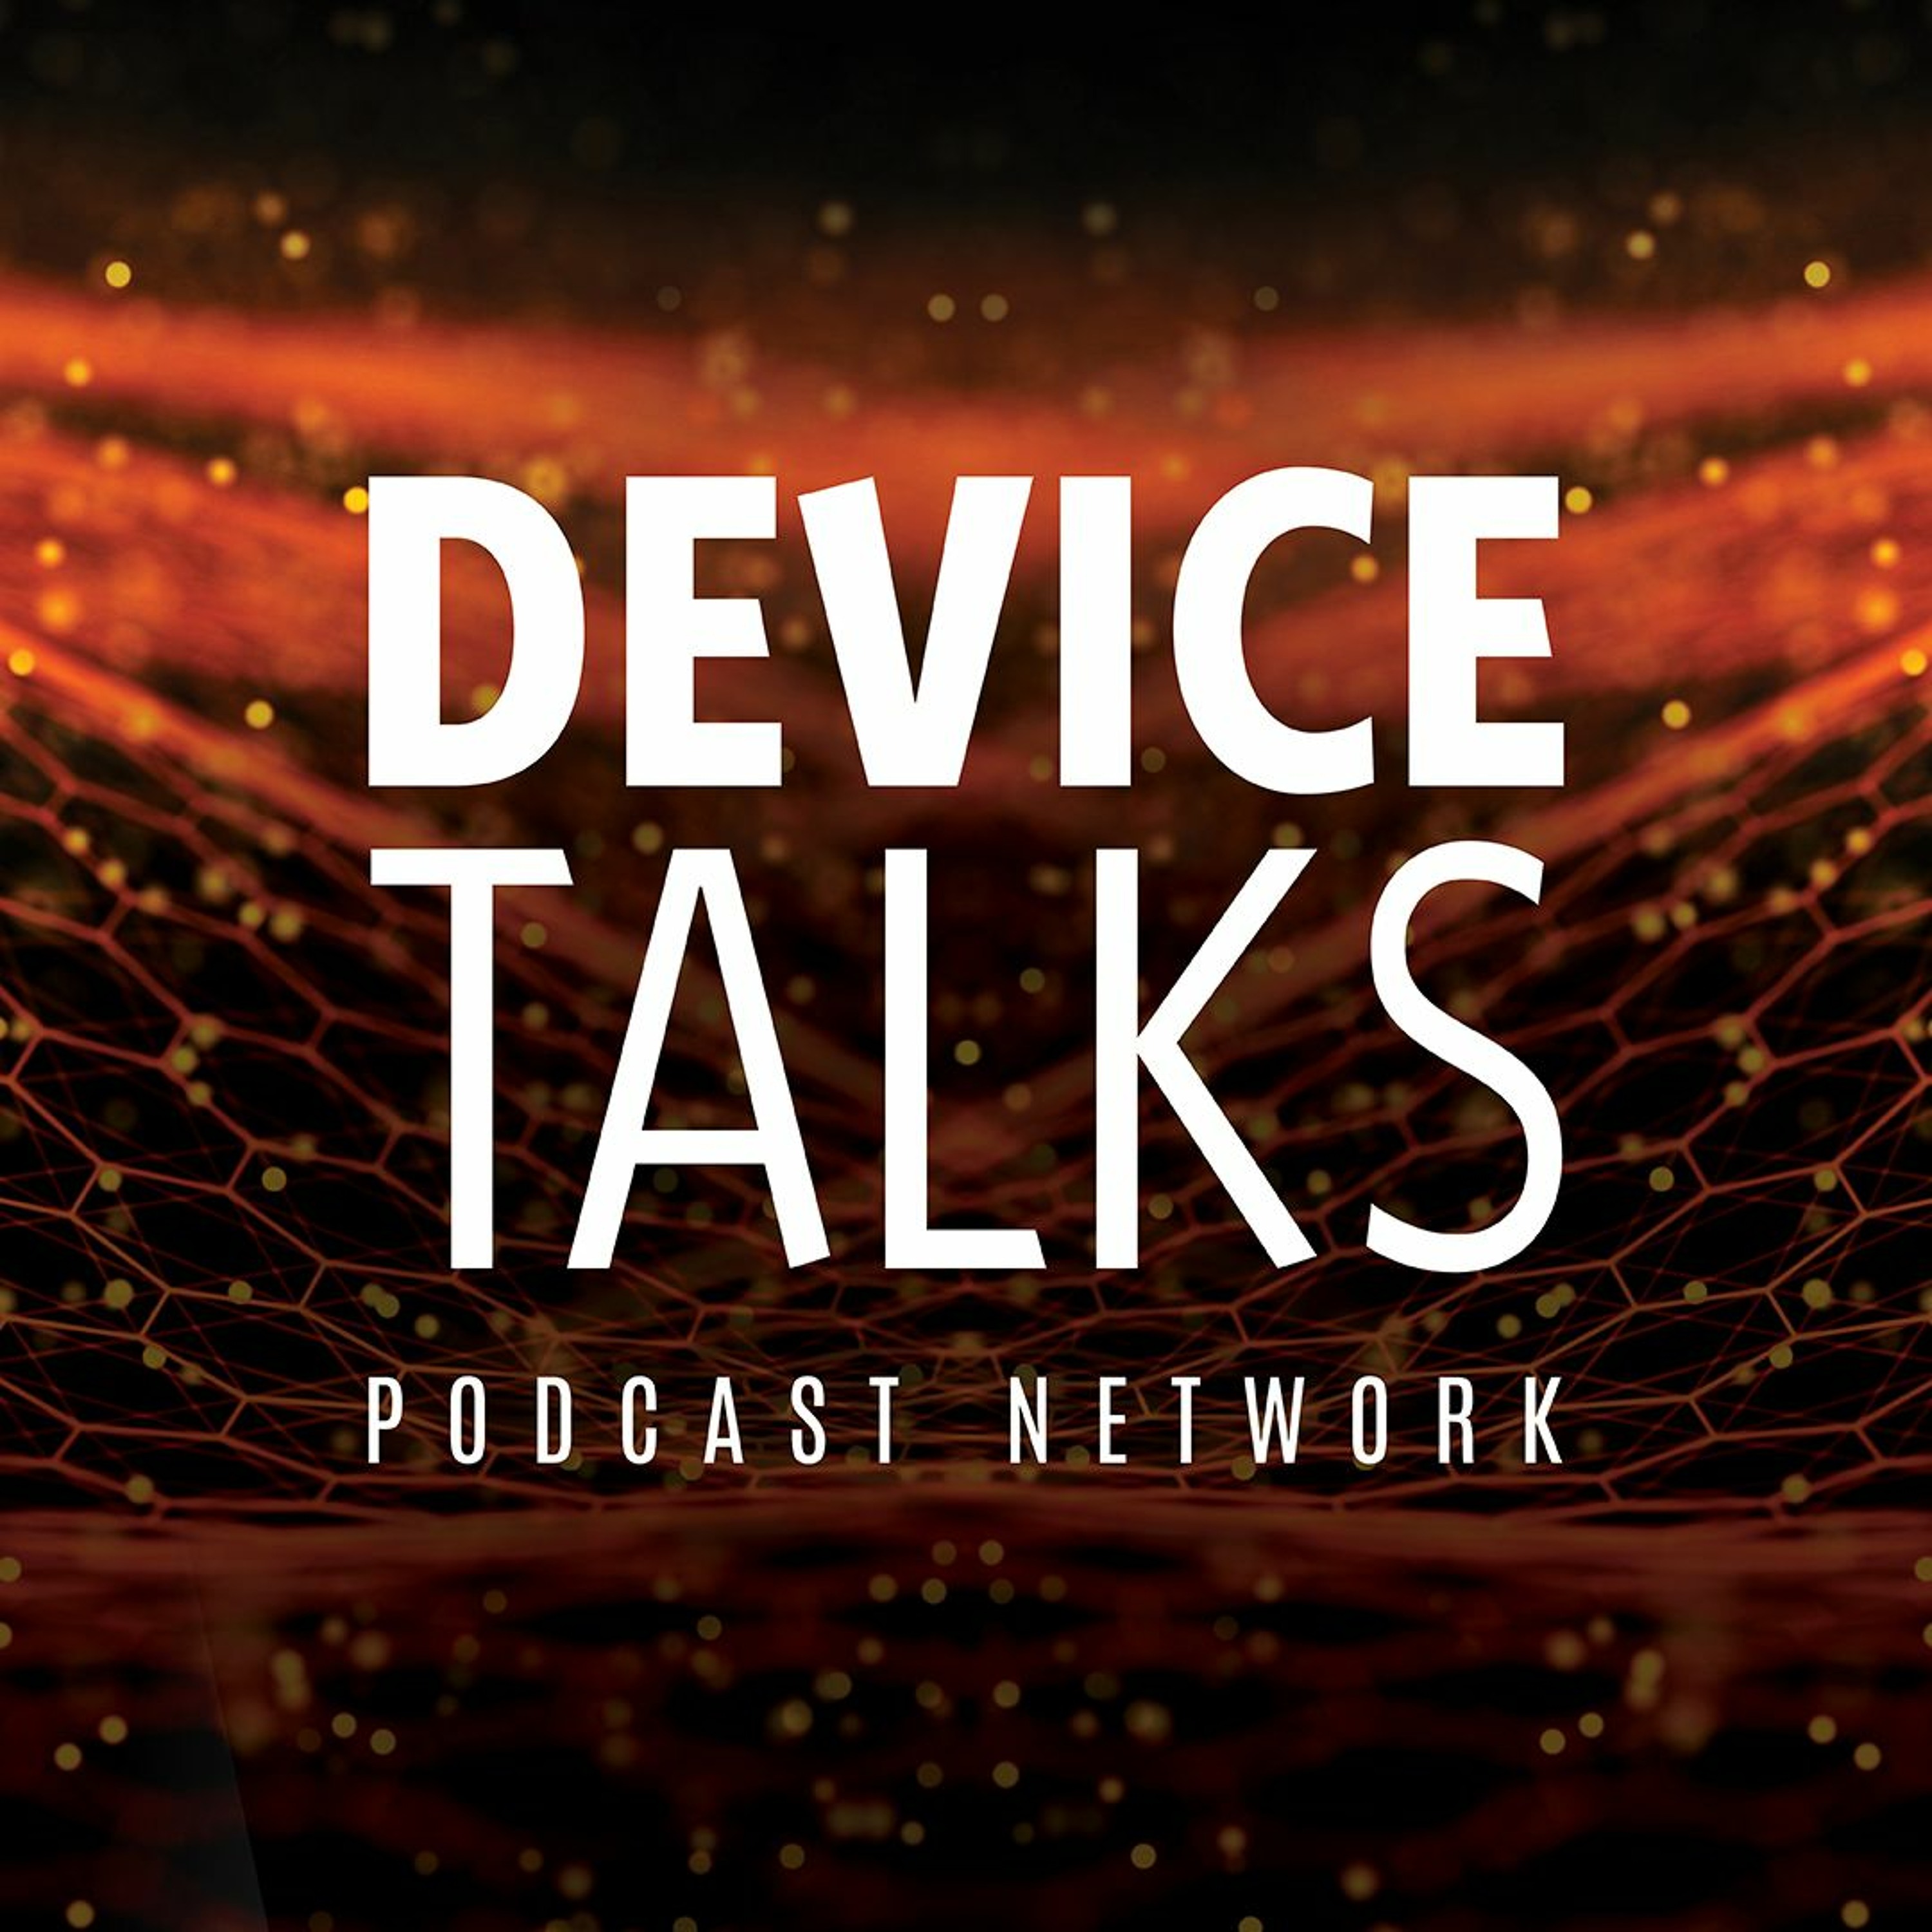 Synchron’s Haggstrom delivers a taste of what he’ll be sharing on neural tech at DeviceTalks West